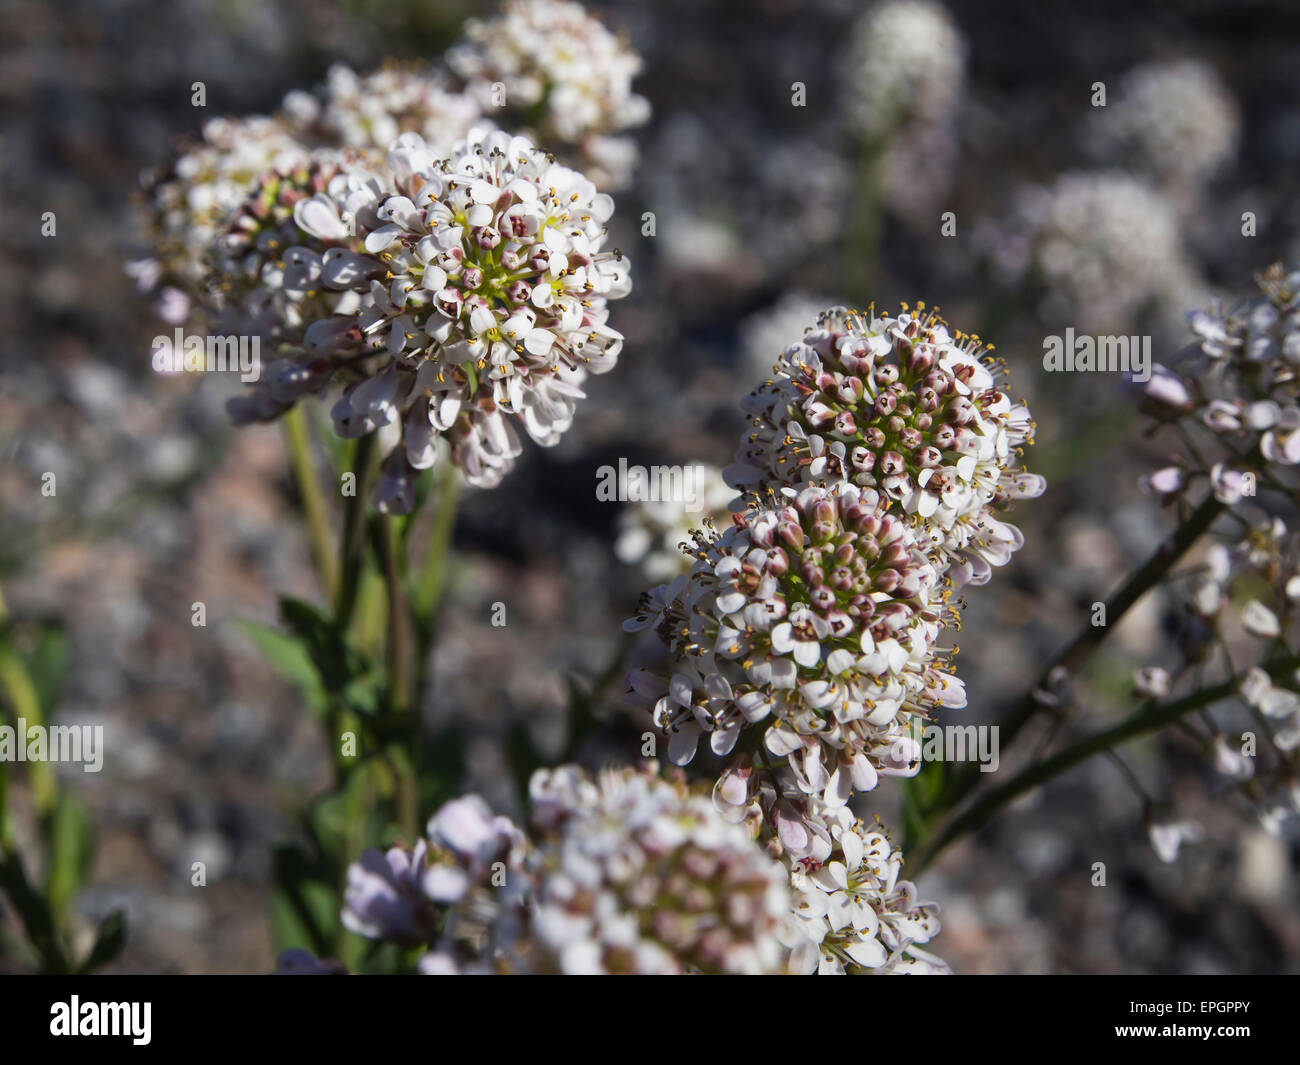 Thlaspi caerulescens,  Alpine Penny-cress or Alpine Pennygrass, common in Norway in early spring Stock Photo